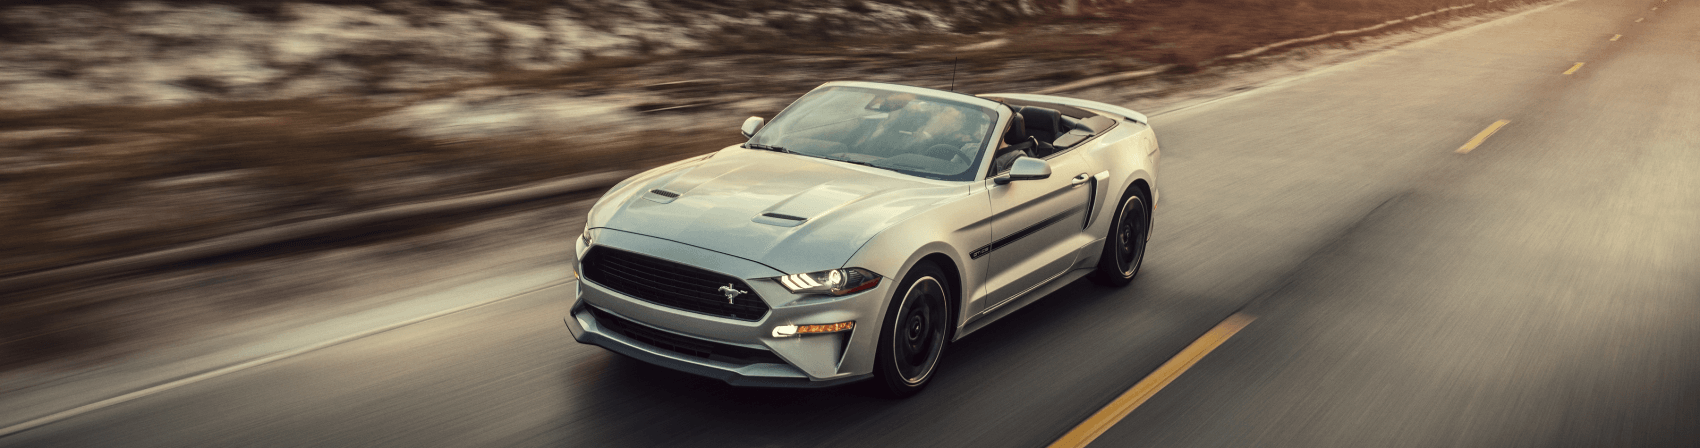 2019 Ford Mustang Convertible Silver Sunset